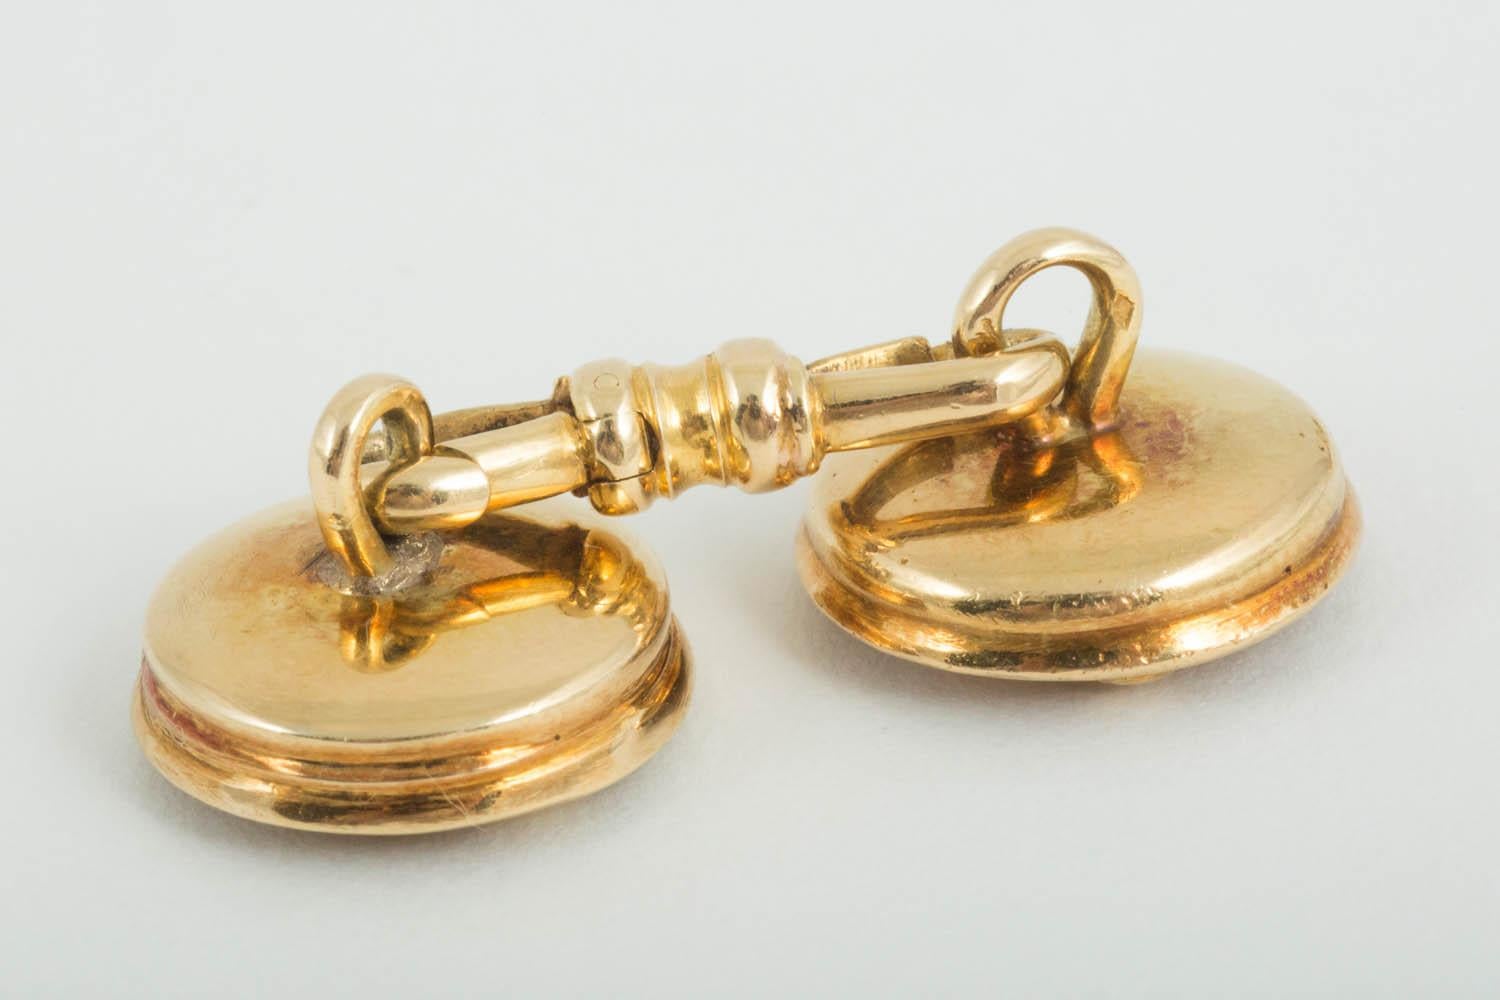 Men's Cufflinks 18 Karat Gold Concave with Theological Scenes, Jules Wiese Paris, 1870 For Sale